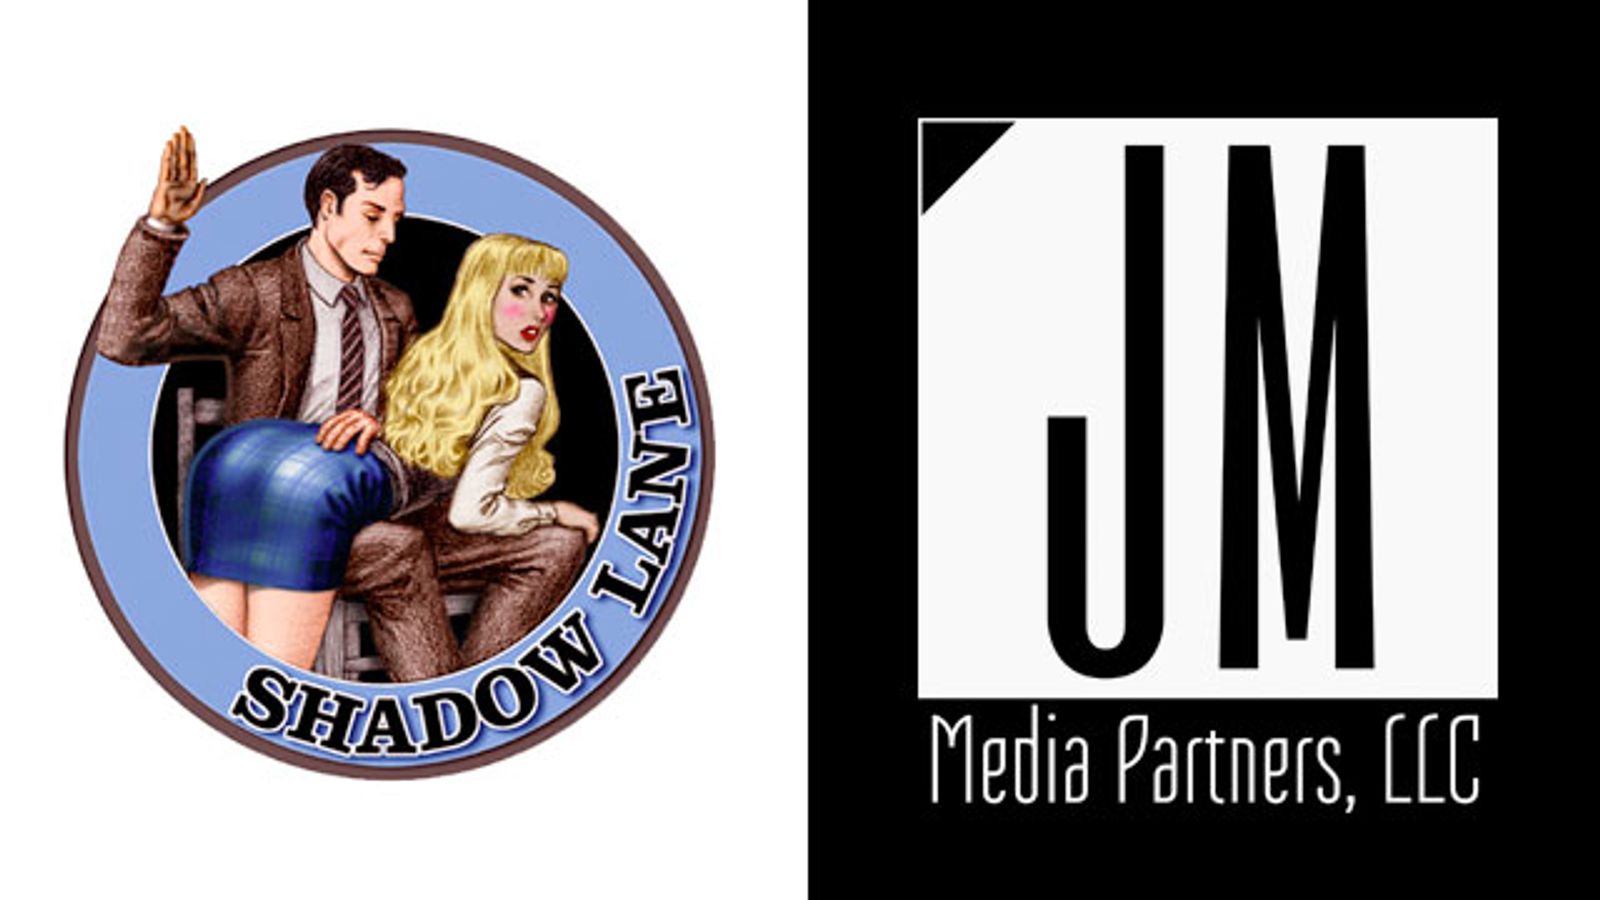 Shadow Lane Partners with JM Media Partners to Launch Website